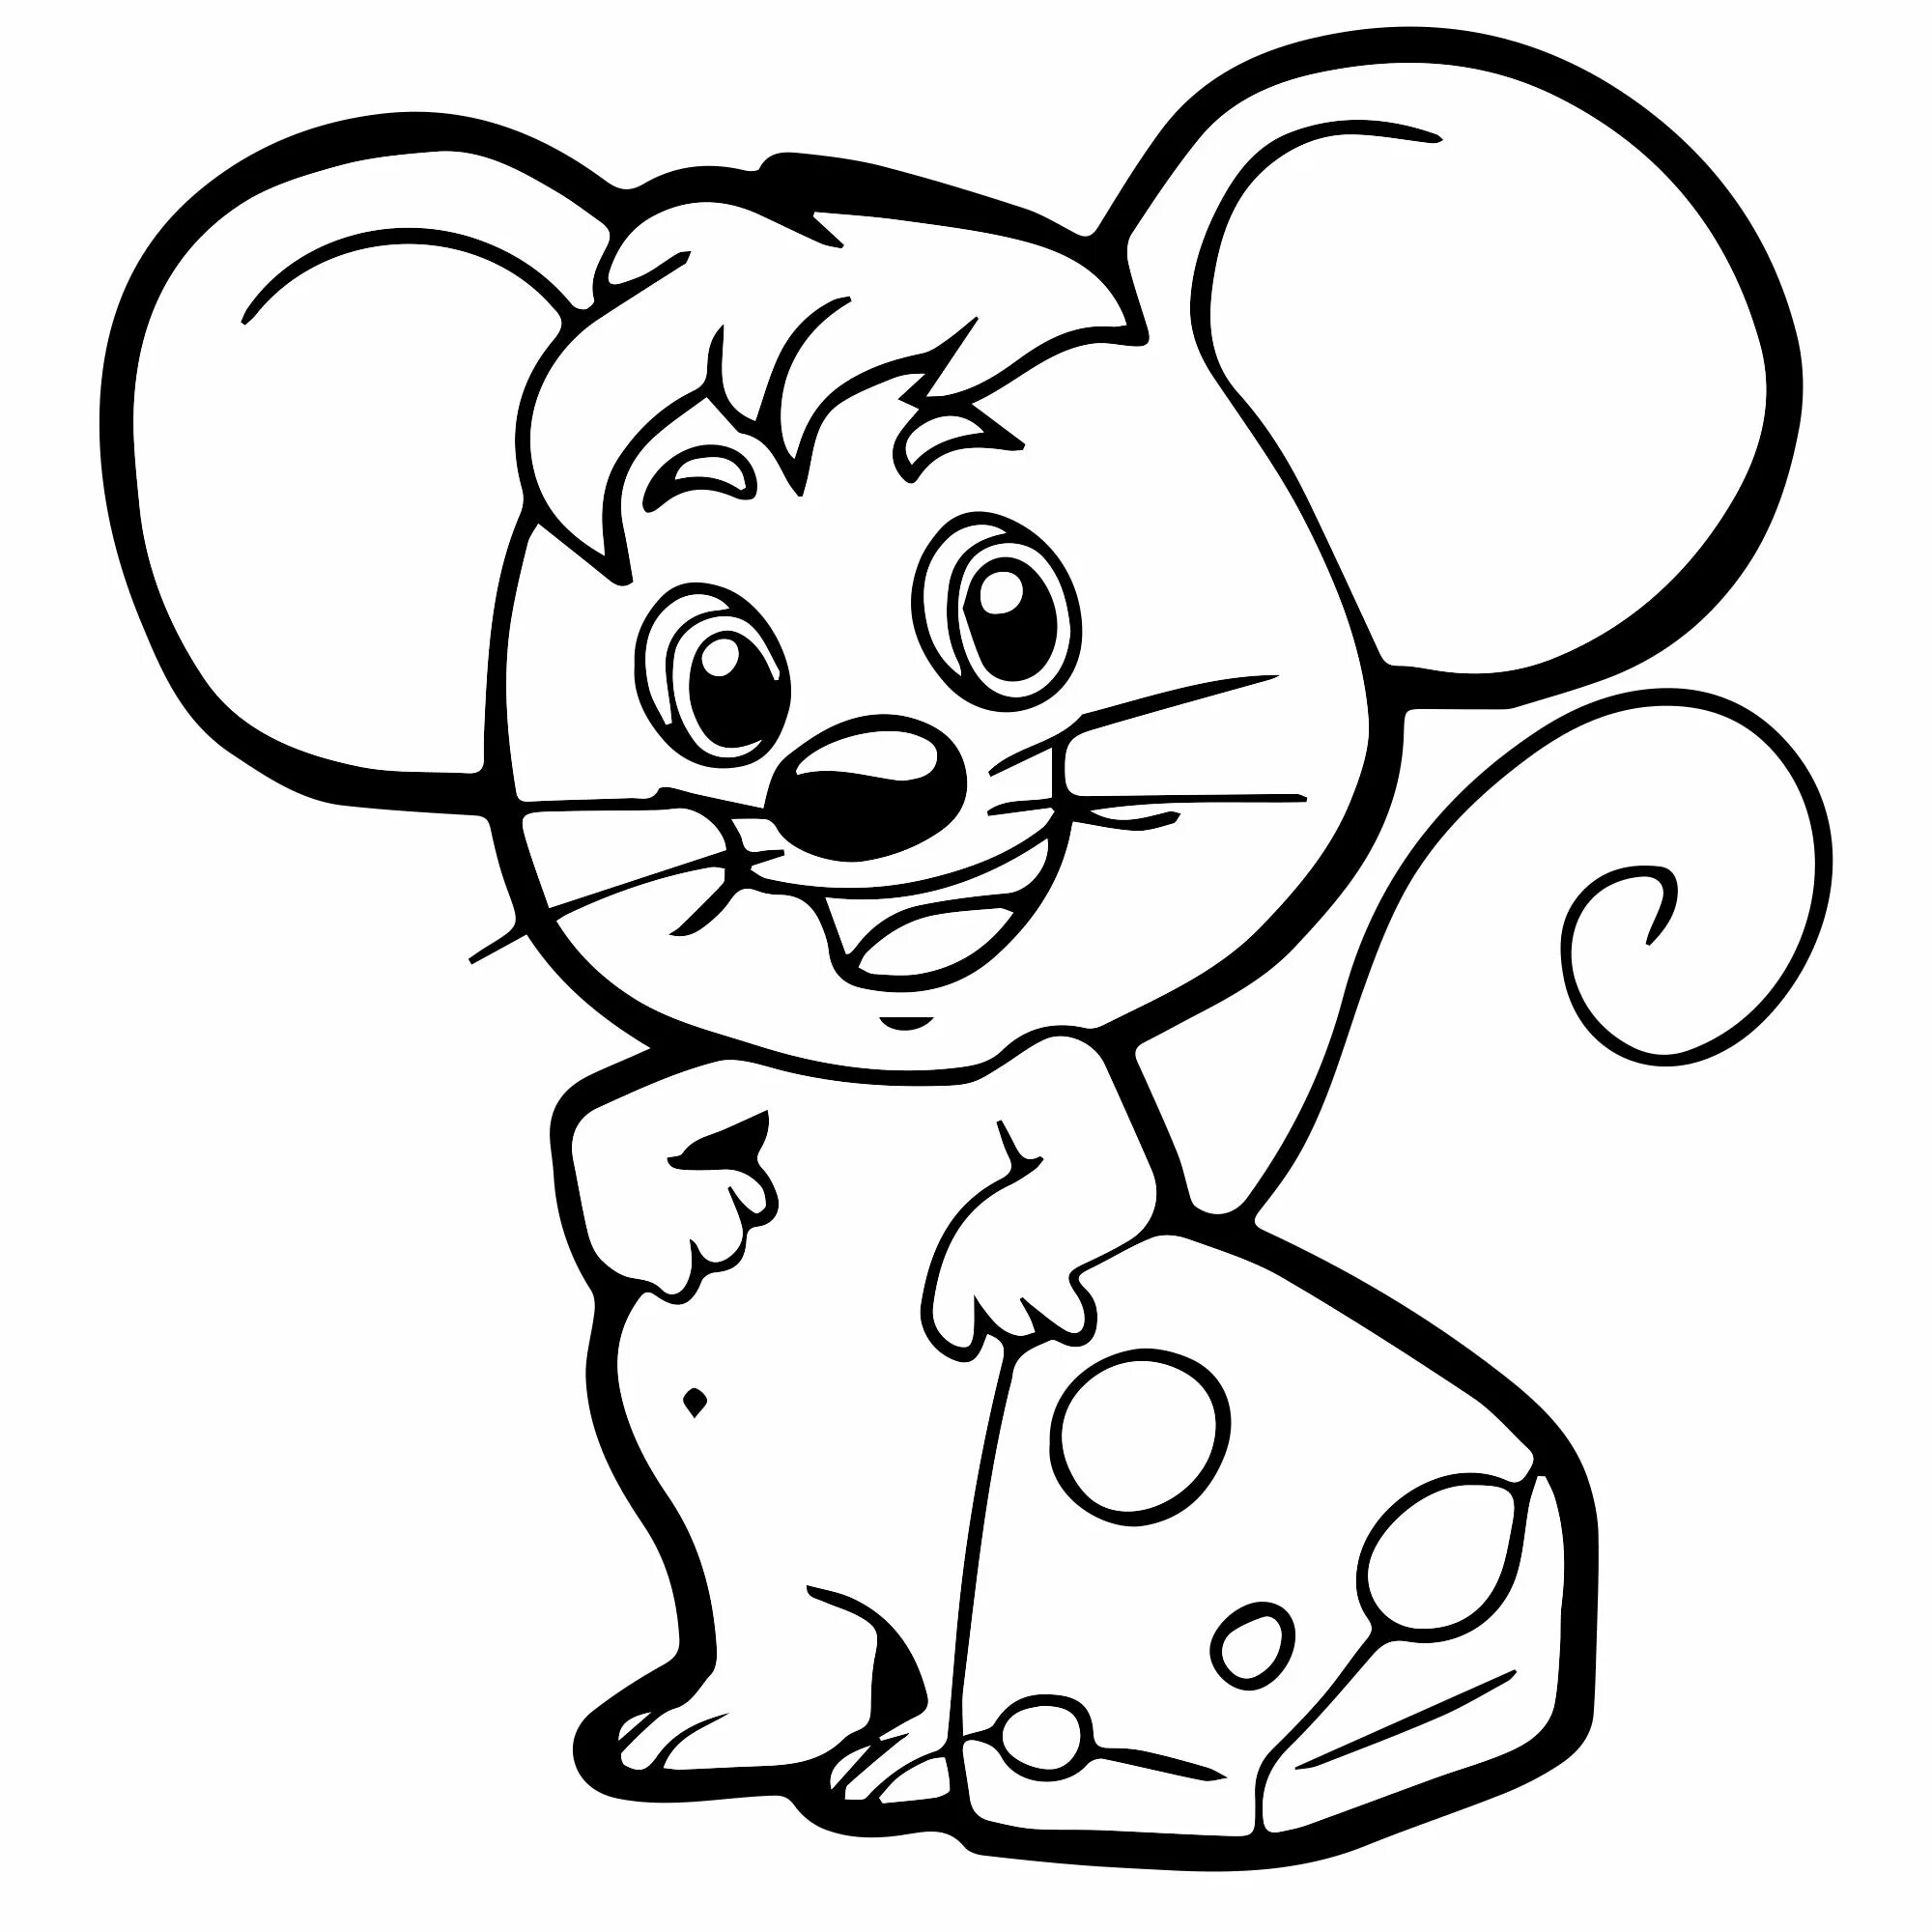 Colorful bright coloring mouse for children